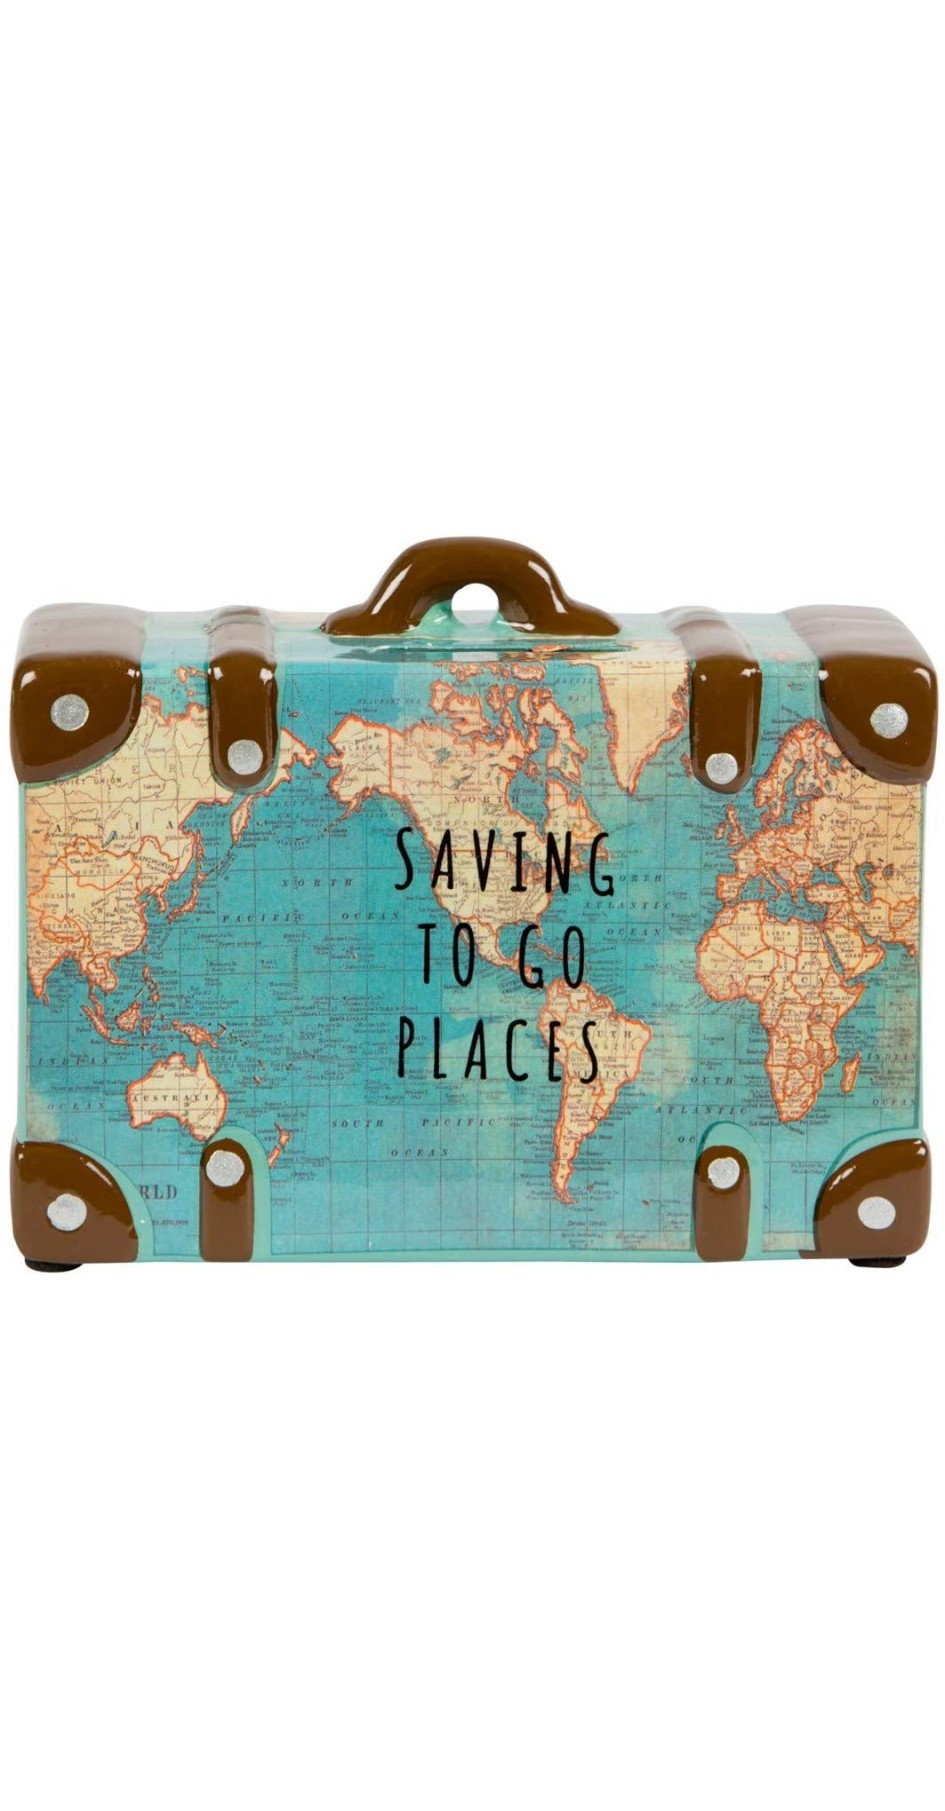 Saving to go places Vintage map Money Bank